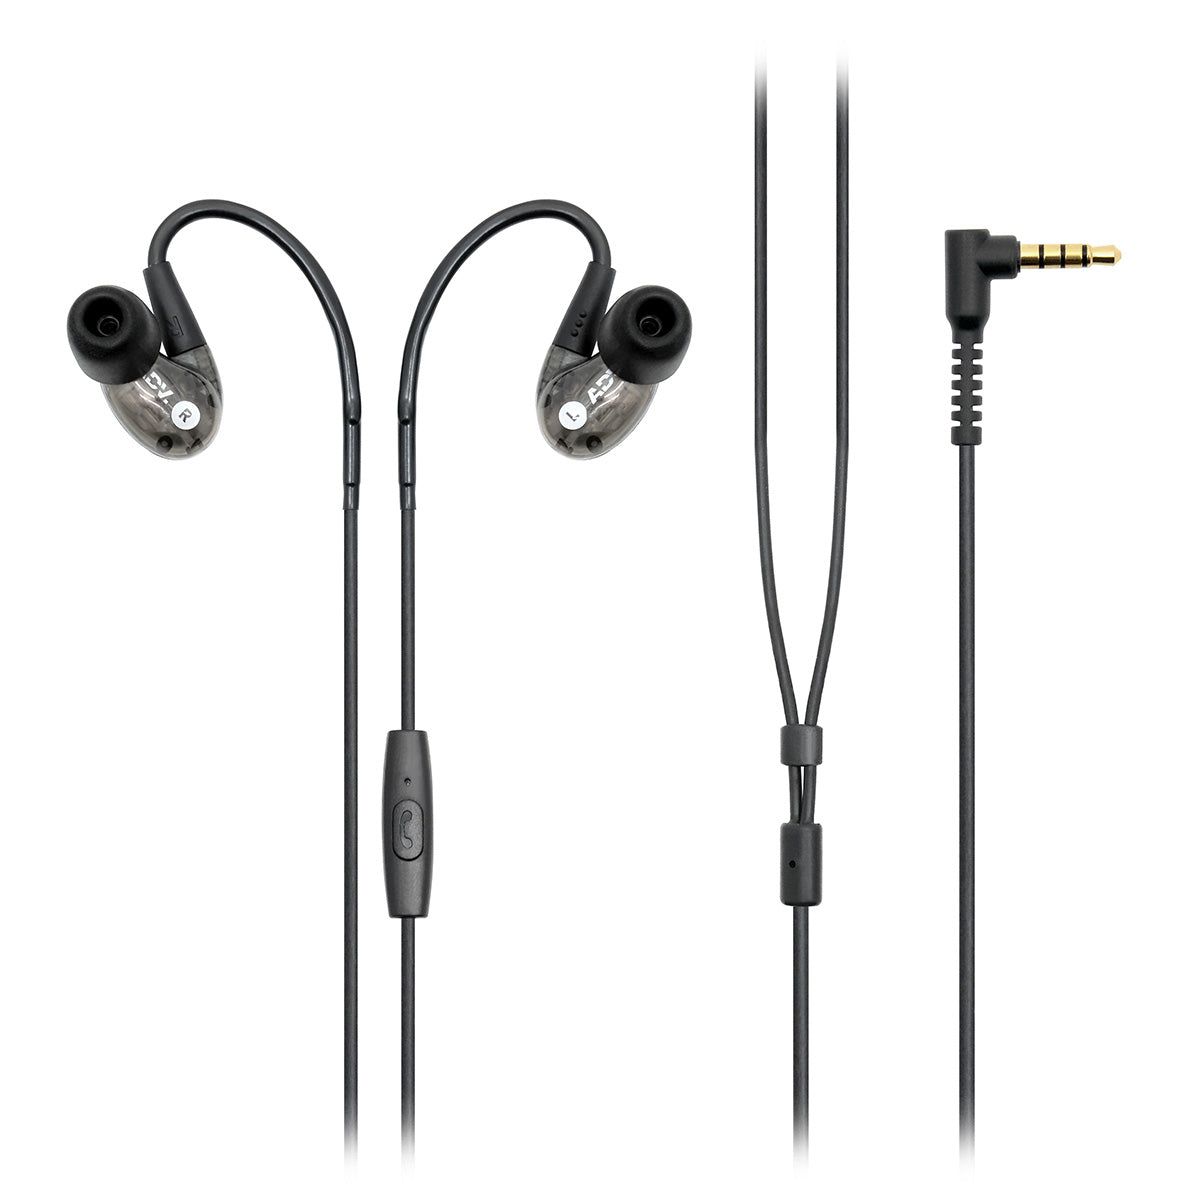 ADV. Model 2 Mobile In-ear Monitor for Musicians and Professionals with In-line Microphone and Remote #edition_mobile